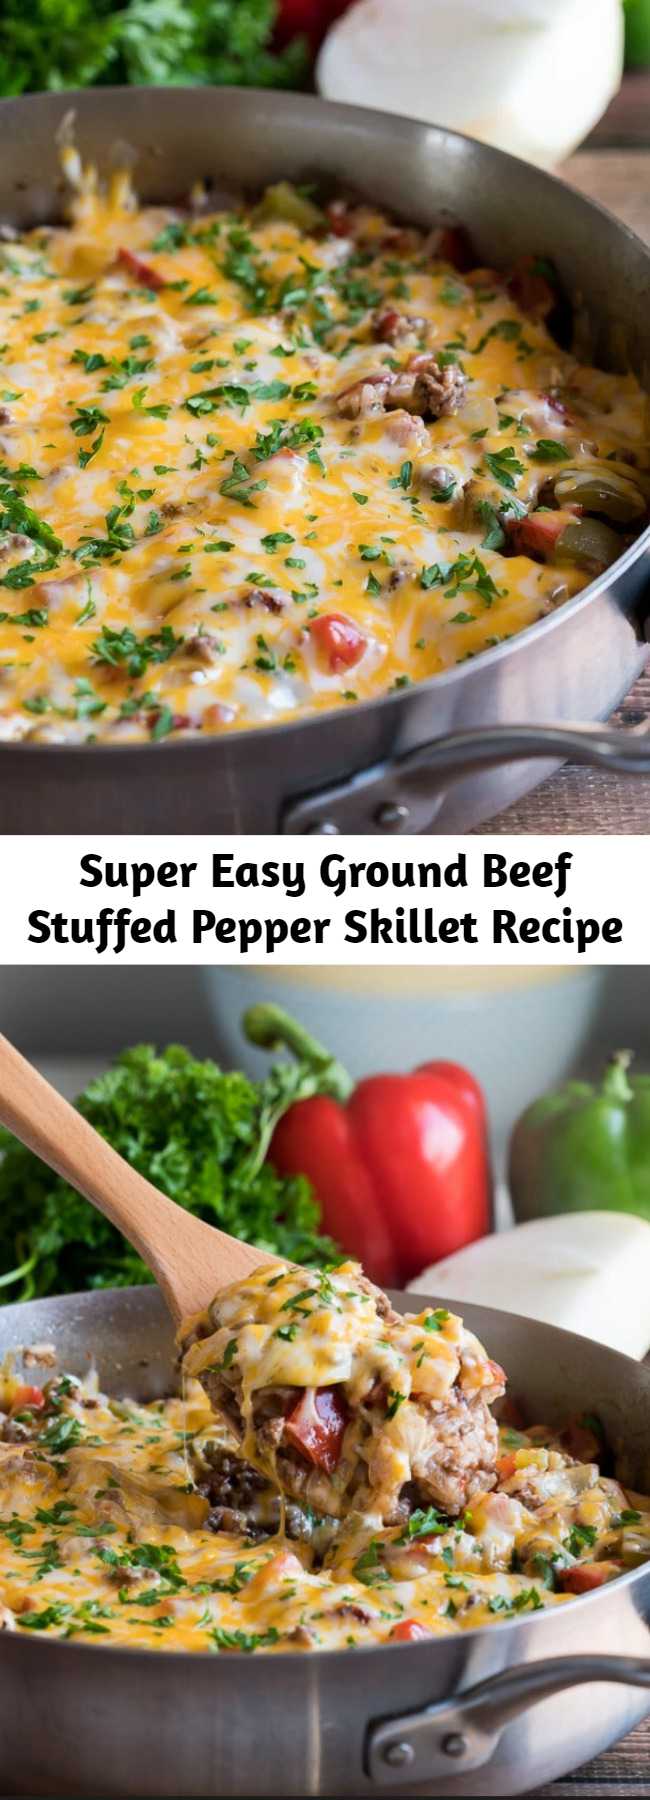 Super Easy Ground Beef Stuffed Pepper Skillet Recipe - This super easy Ground Beef Stuffed Pepper Skillet is made in just one pan in less than 30 minutes! All the flavors you love of a stuffed pepper without all the hassle!